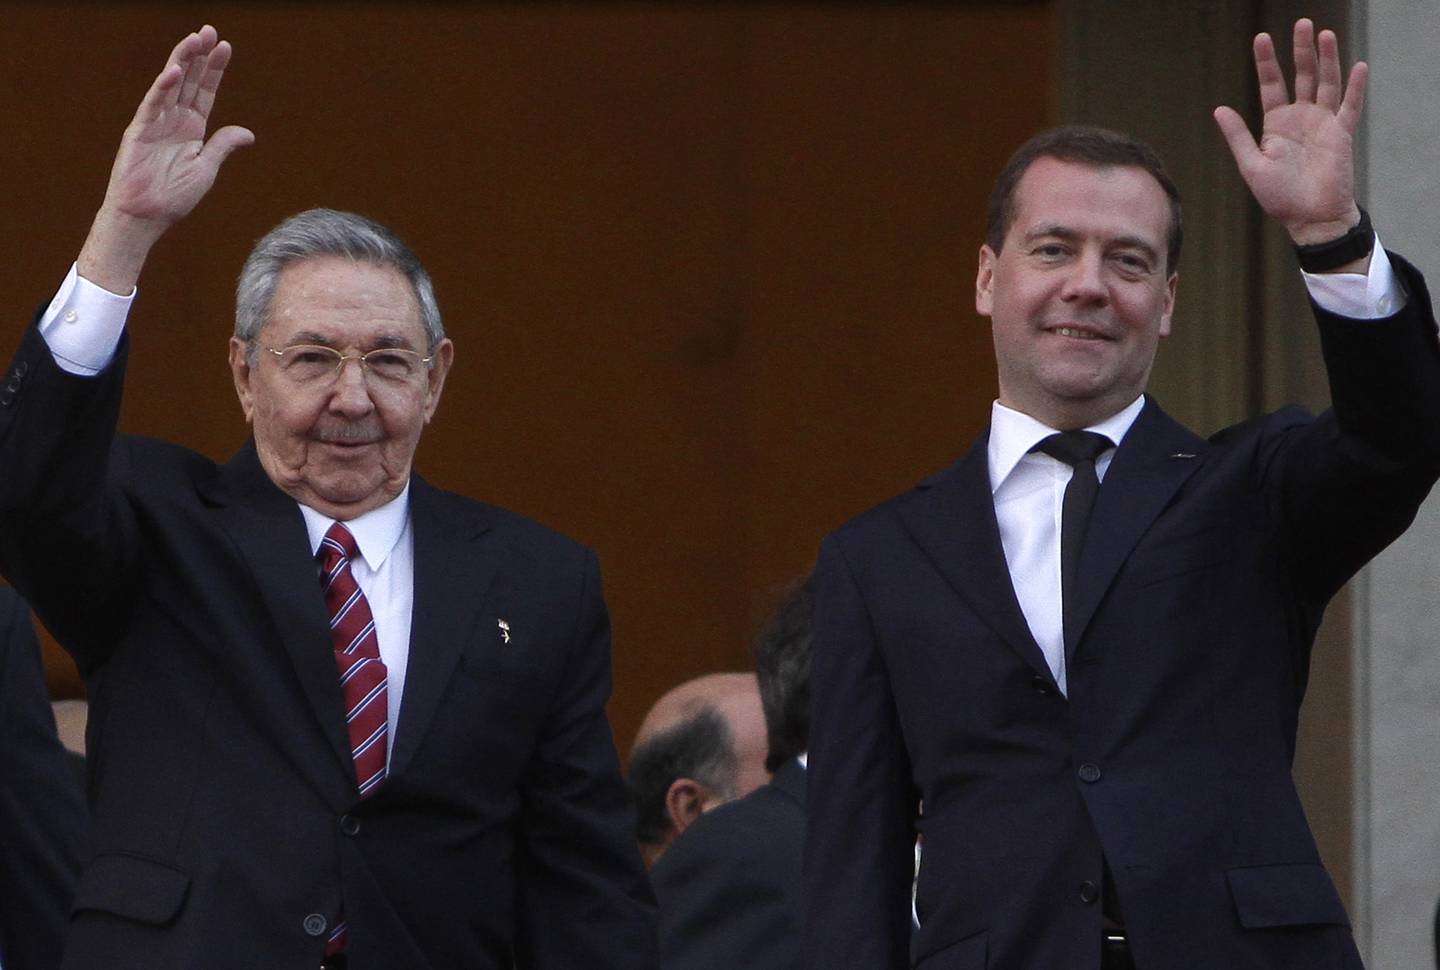 Cuba's President Raul Castro, right, and Russia's Prime Minister Dmitry Medvedev, left, wave to journalists after a wreath-laying ceremony at the Jose Marti monument in Havana, Cuba, Thursday, Feb. 21, 2013. (AP